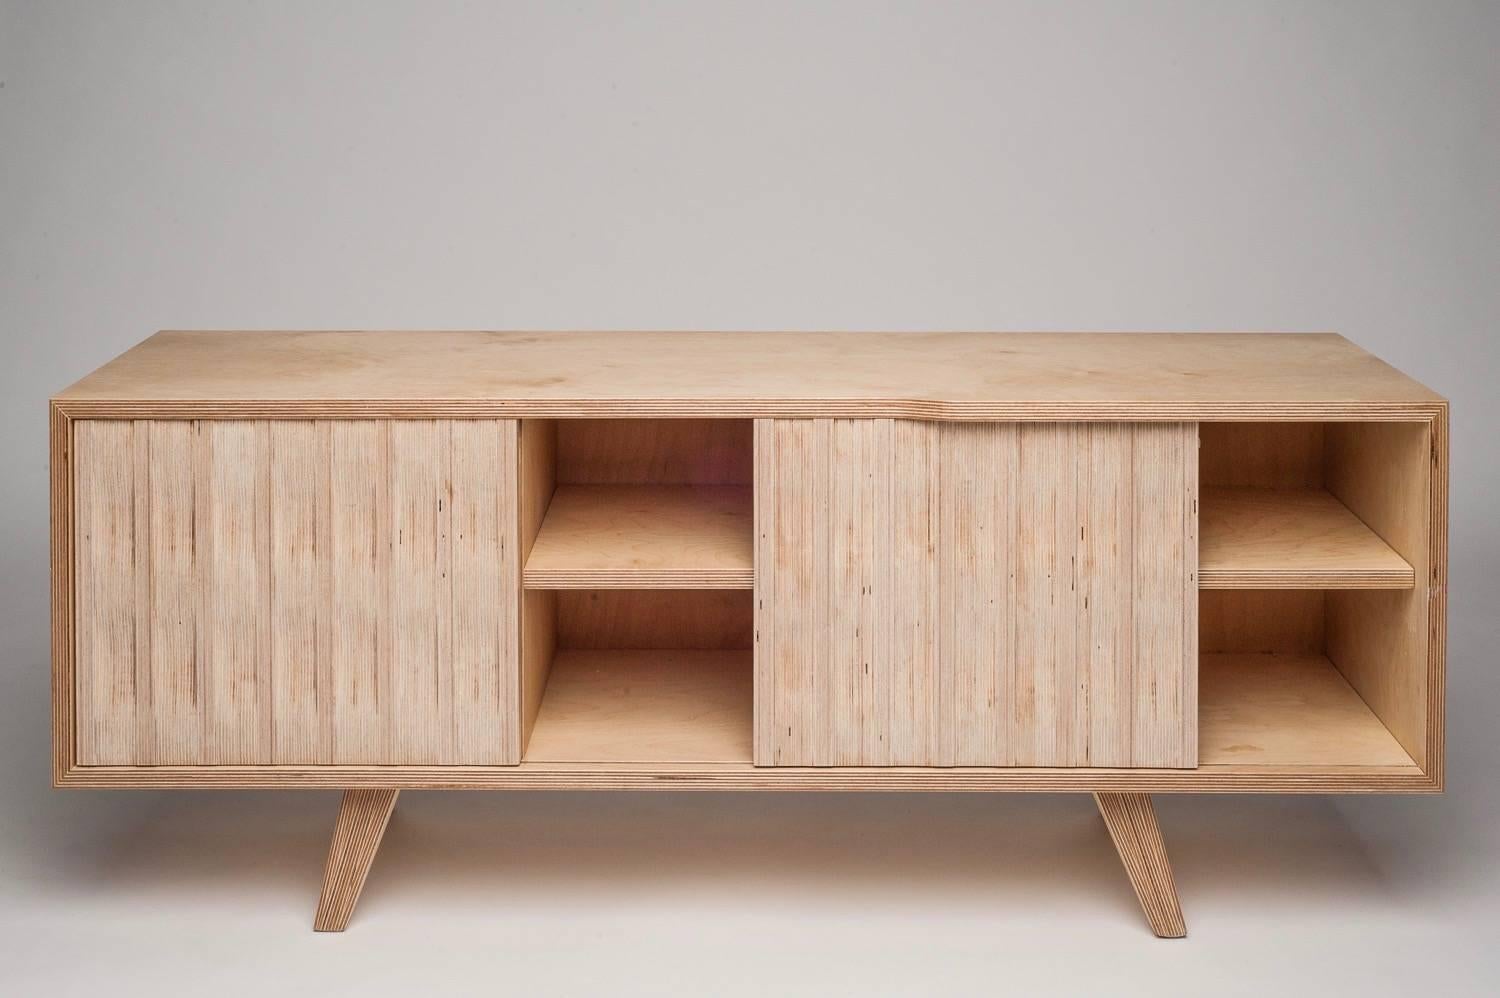 The Mabley sideboard featuring individually hand shaped end grain doors, giving it a unique textured look and feel. Seen here in natural birch, it features three shelved sections with two sliding doors.
This item is made to order meaning sizes and